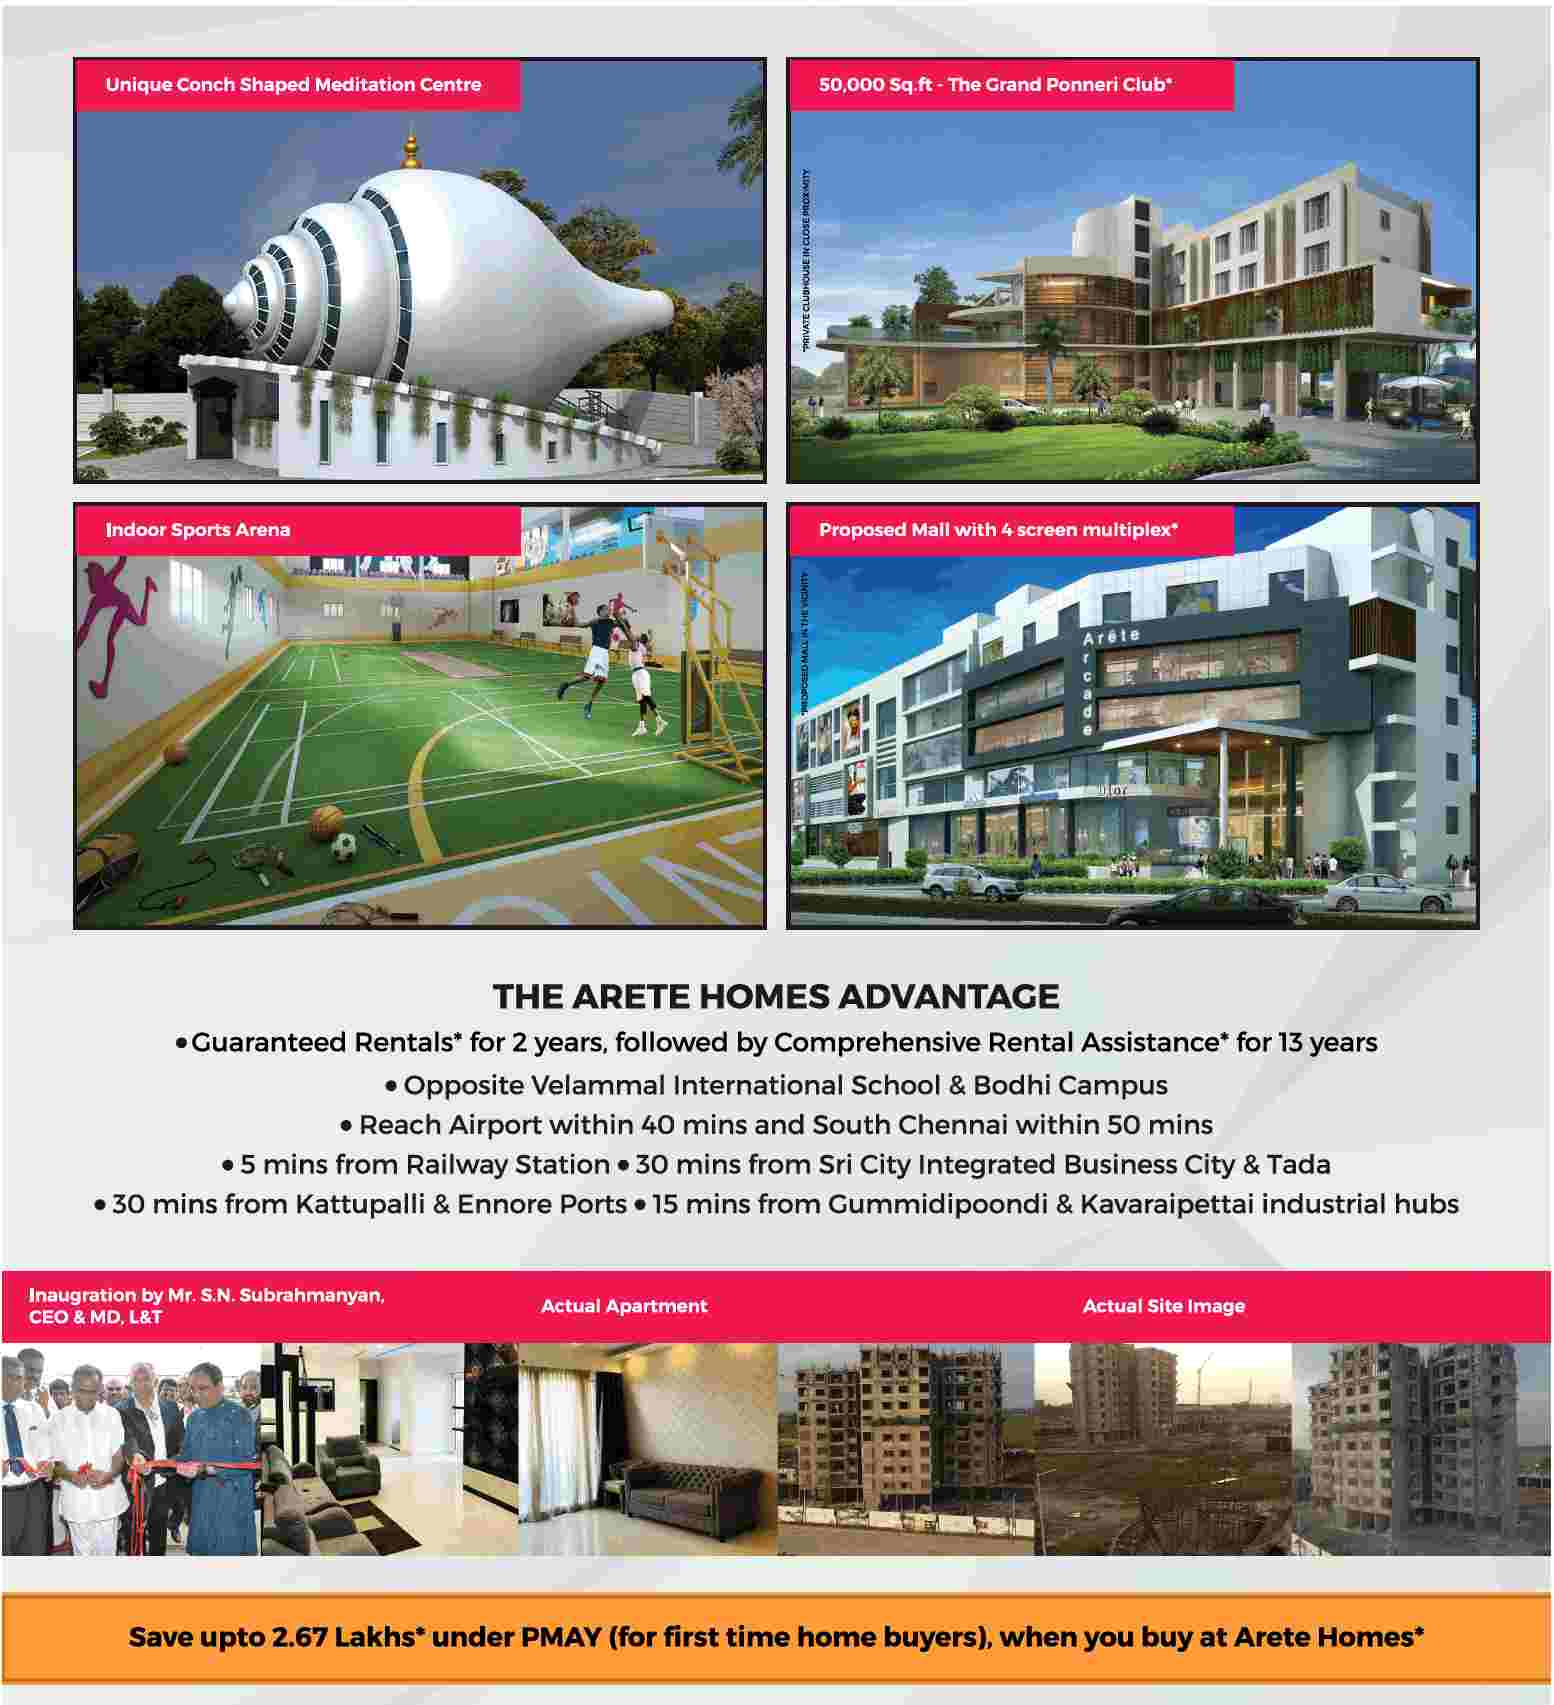 Save upto Rs. 2.67 Lacs when you buy at Prime Arete Homes in Chennai